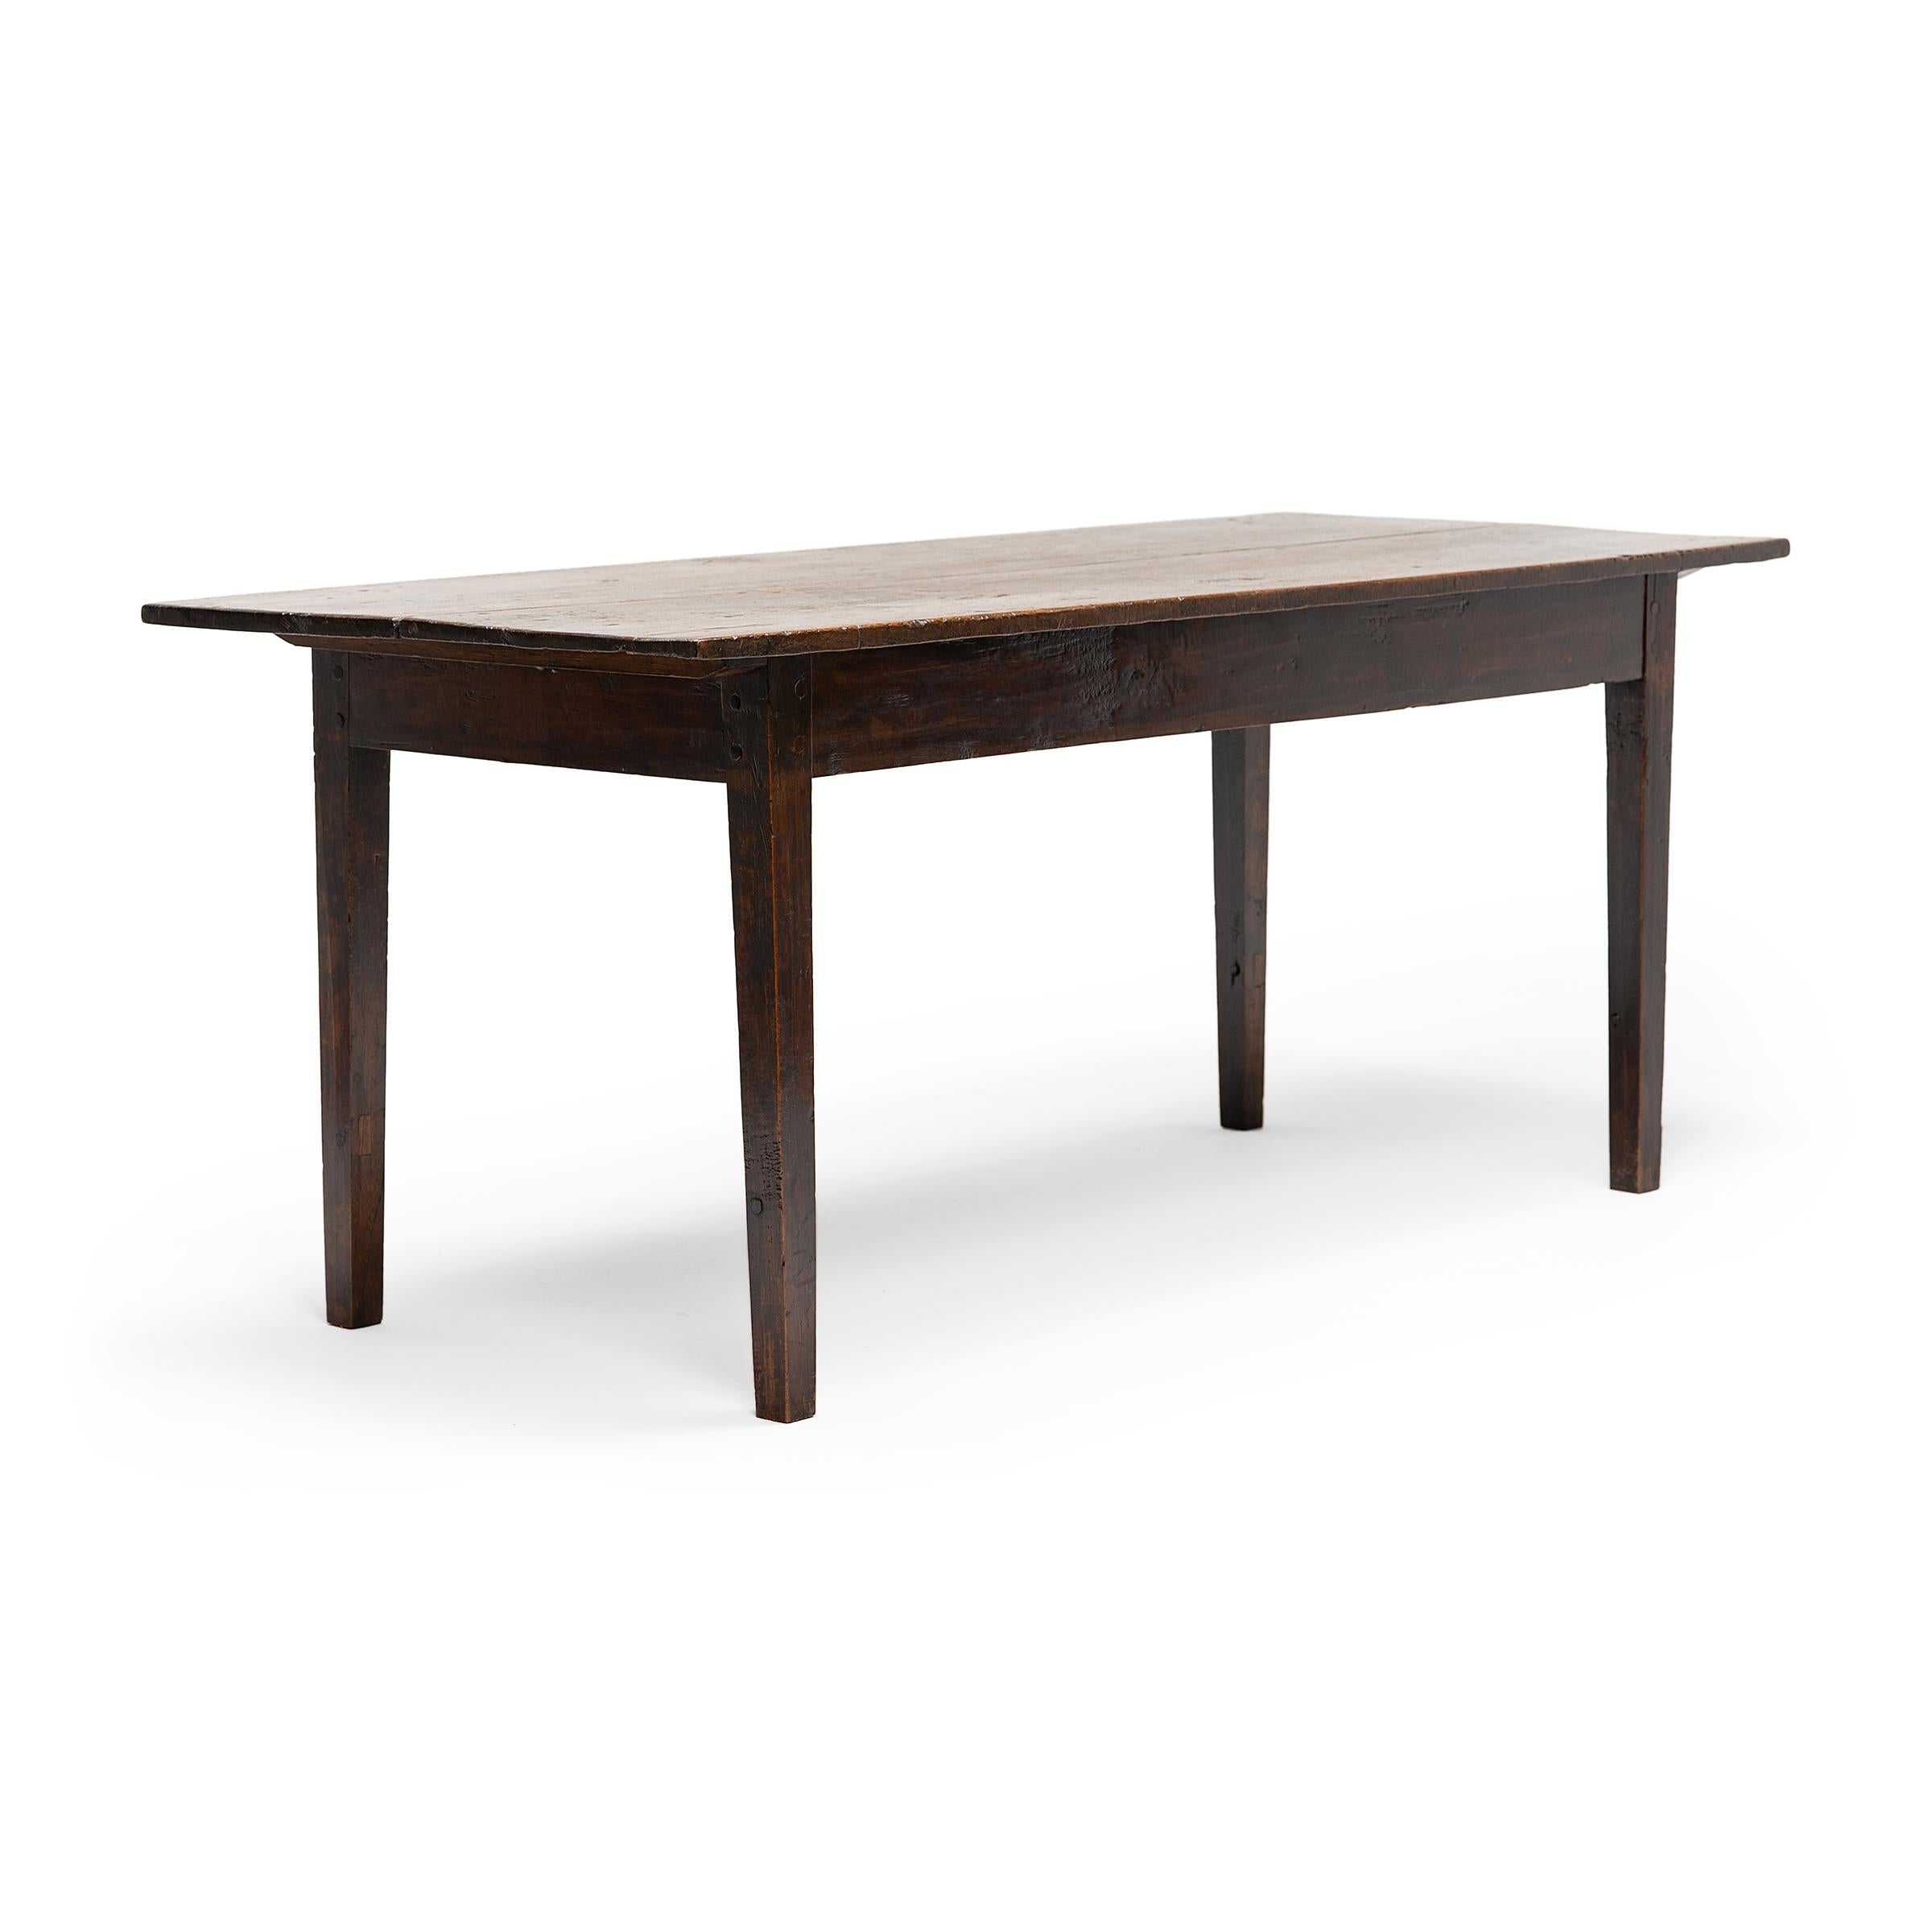 American Shaker Dining Table, c. 1850